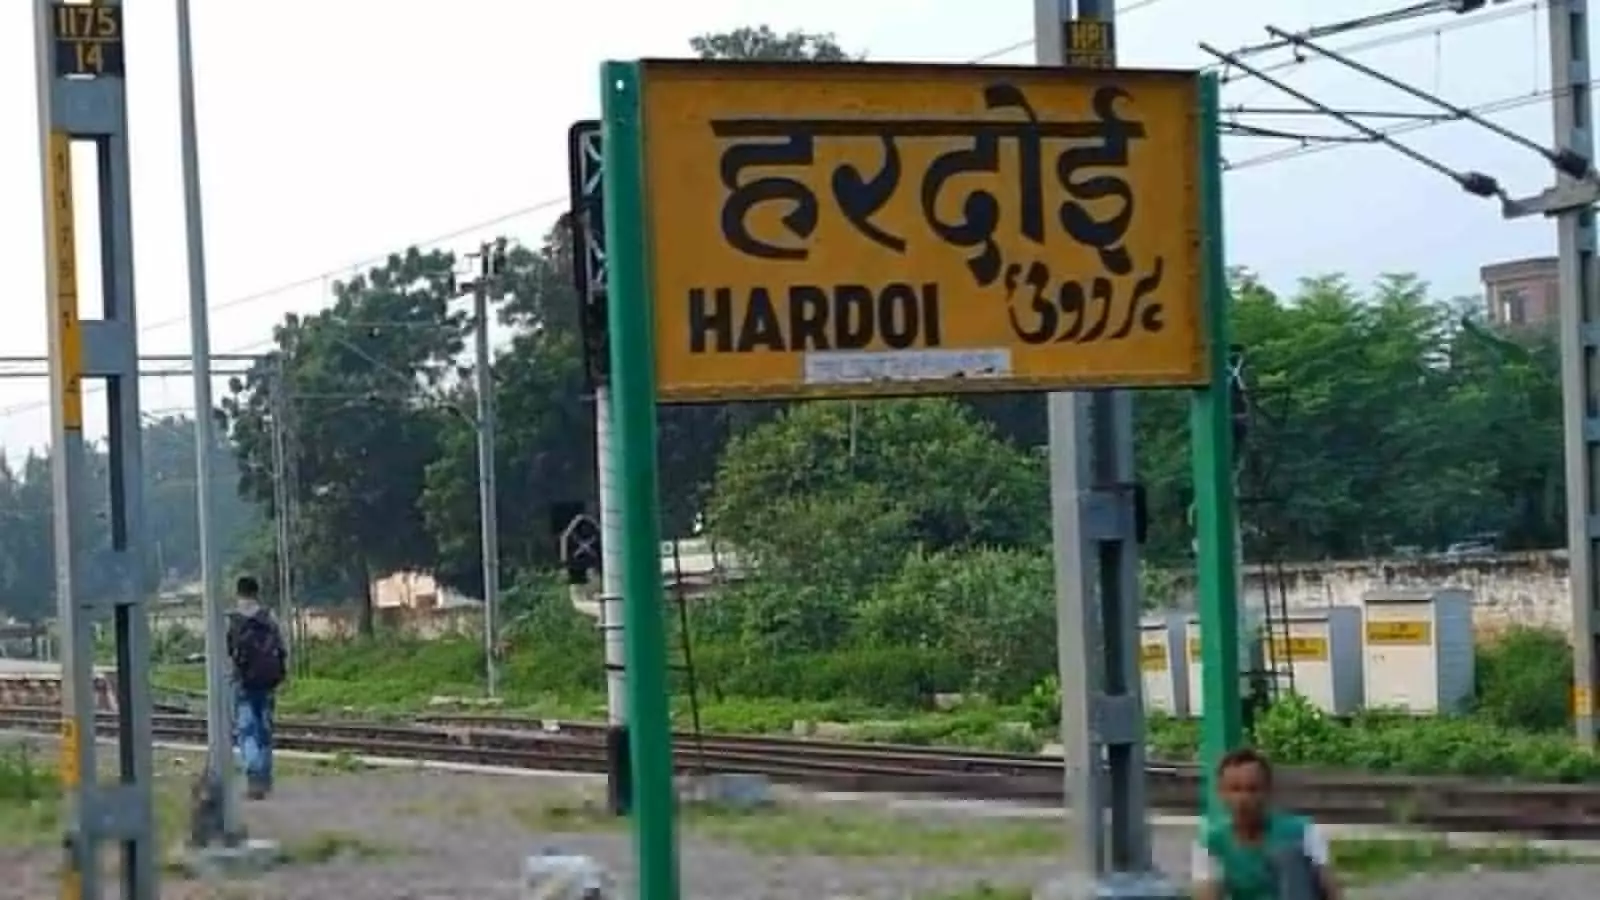 In hardoi Youth died hit by train RPF is considering suicide